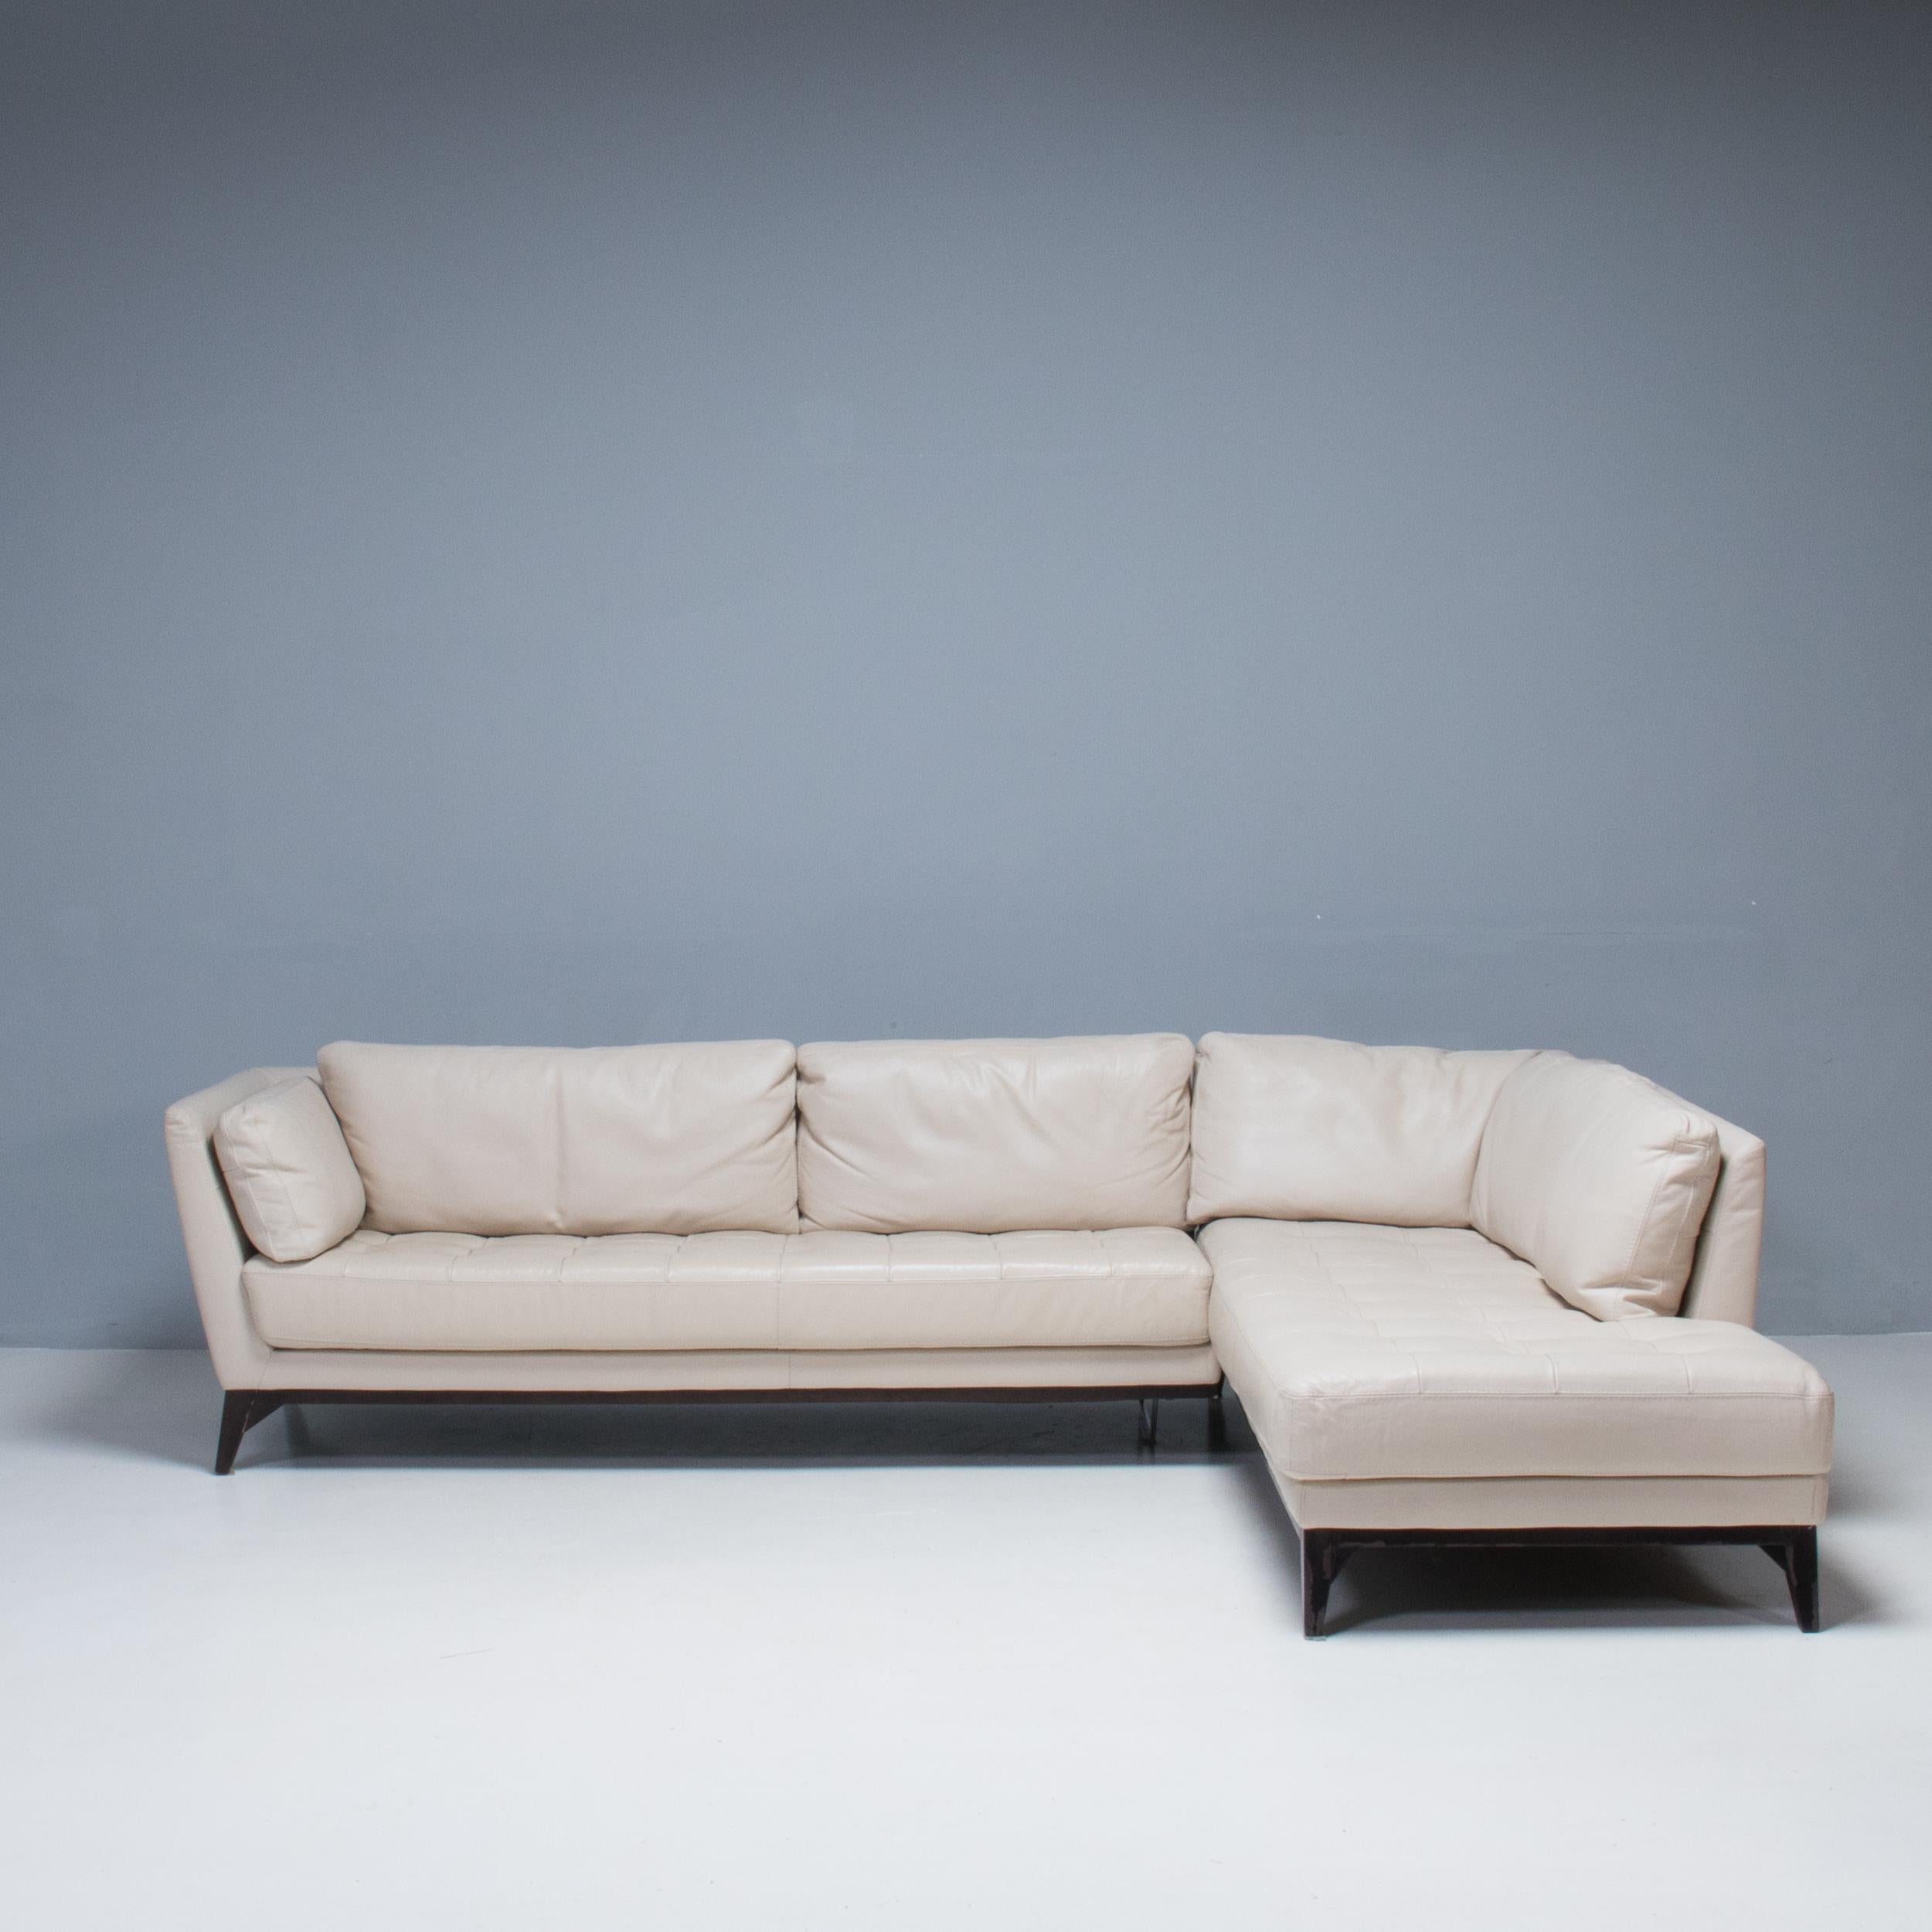 Designed by Philippe Bouix for Roche Bobois, the Perception sofa perfectly balances comfort with elegant modern design.

Constructed from a solid wood and plywood frame on a stained beech base, the sofa has a corner configuration made up of two